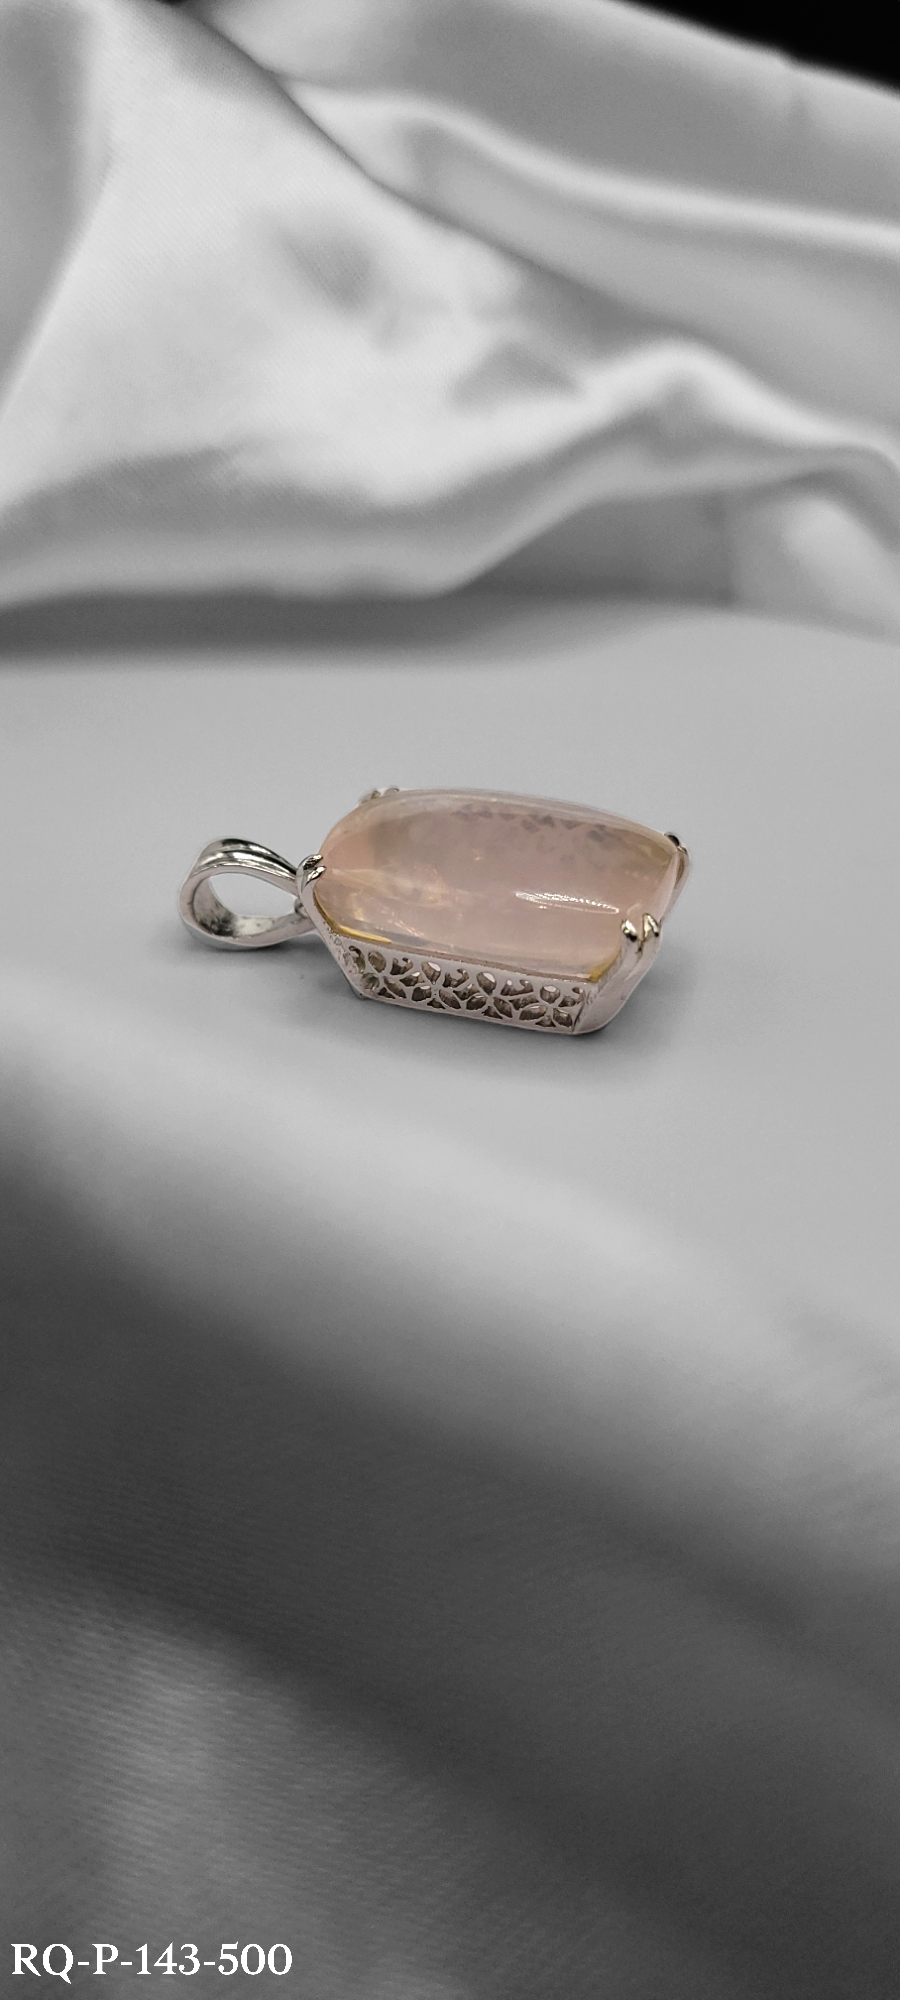 ROSE QUARTZ STONE PENDANT ON STERLING SILVER. KNOWN AS THE CRYSTAL OF UNCONDITIONAL LOVE! DRAMATIC PIECE. ONE OF A KIND